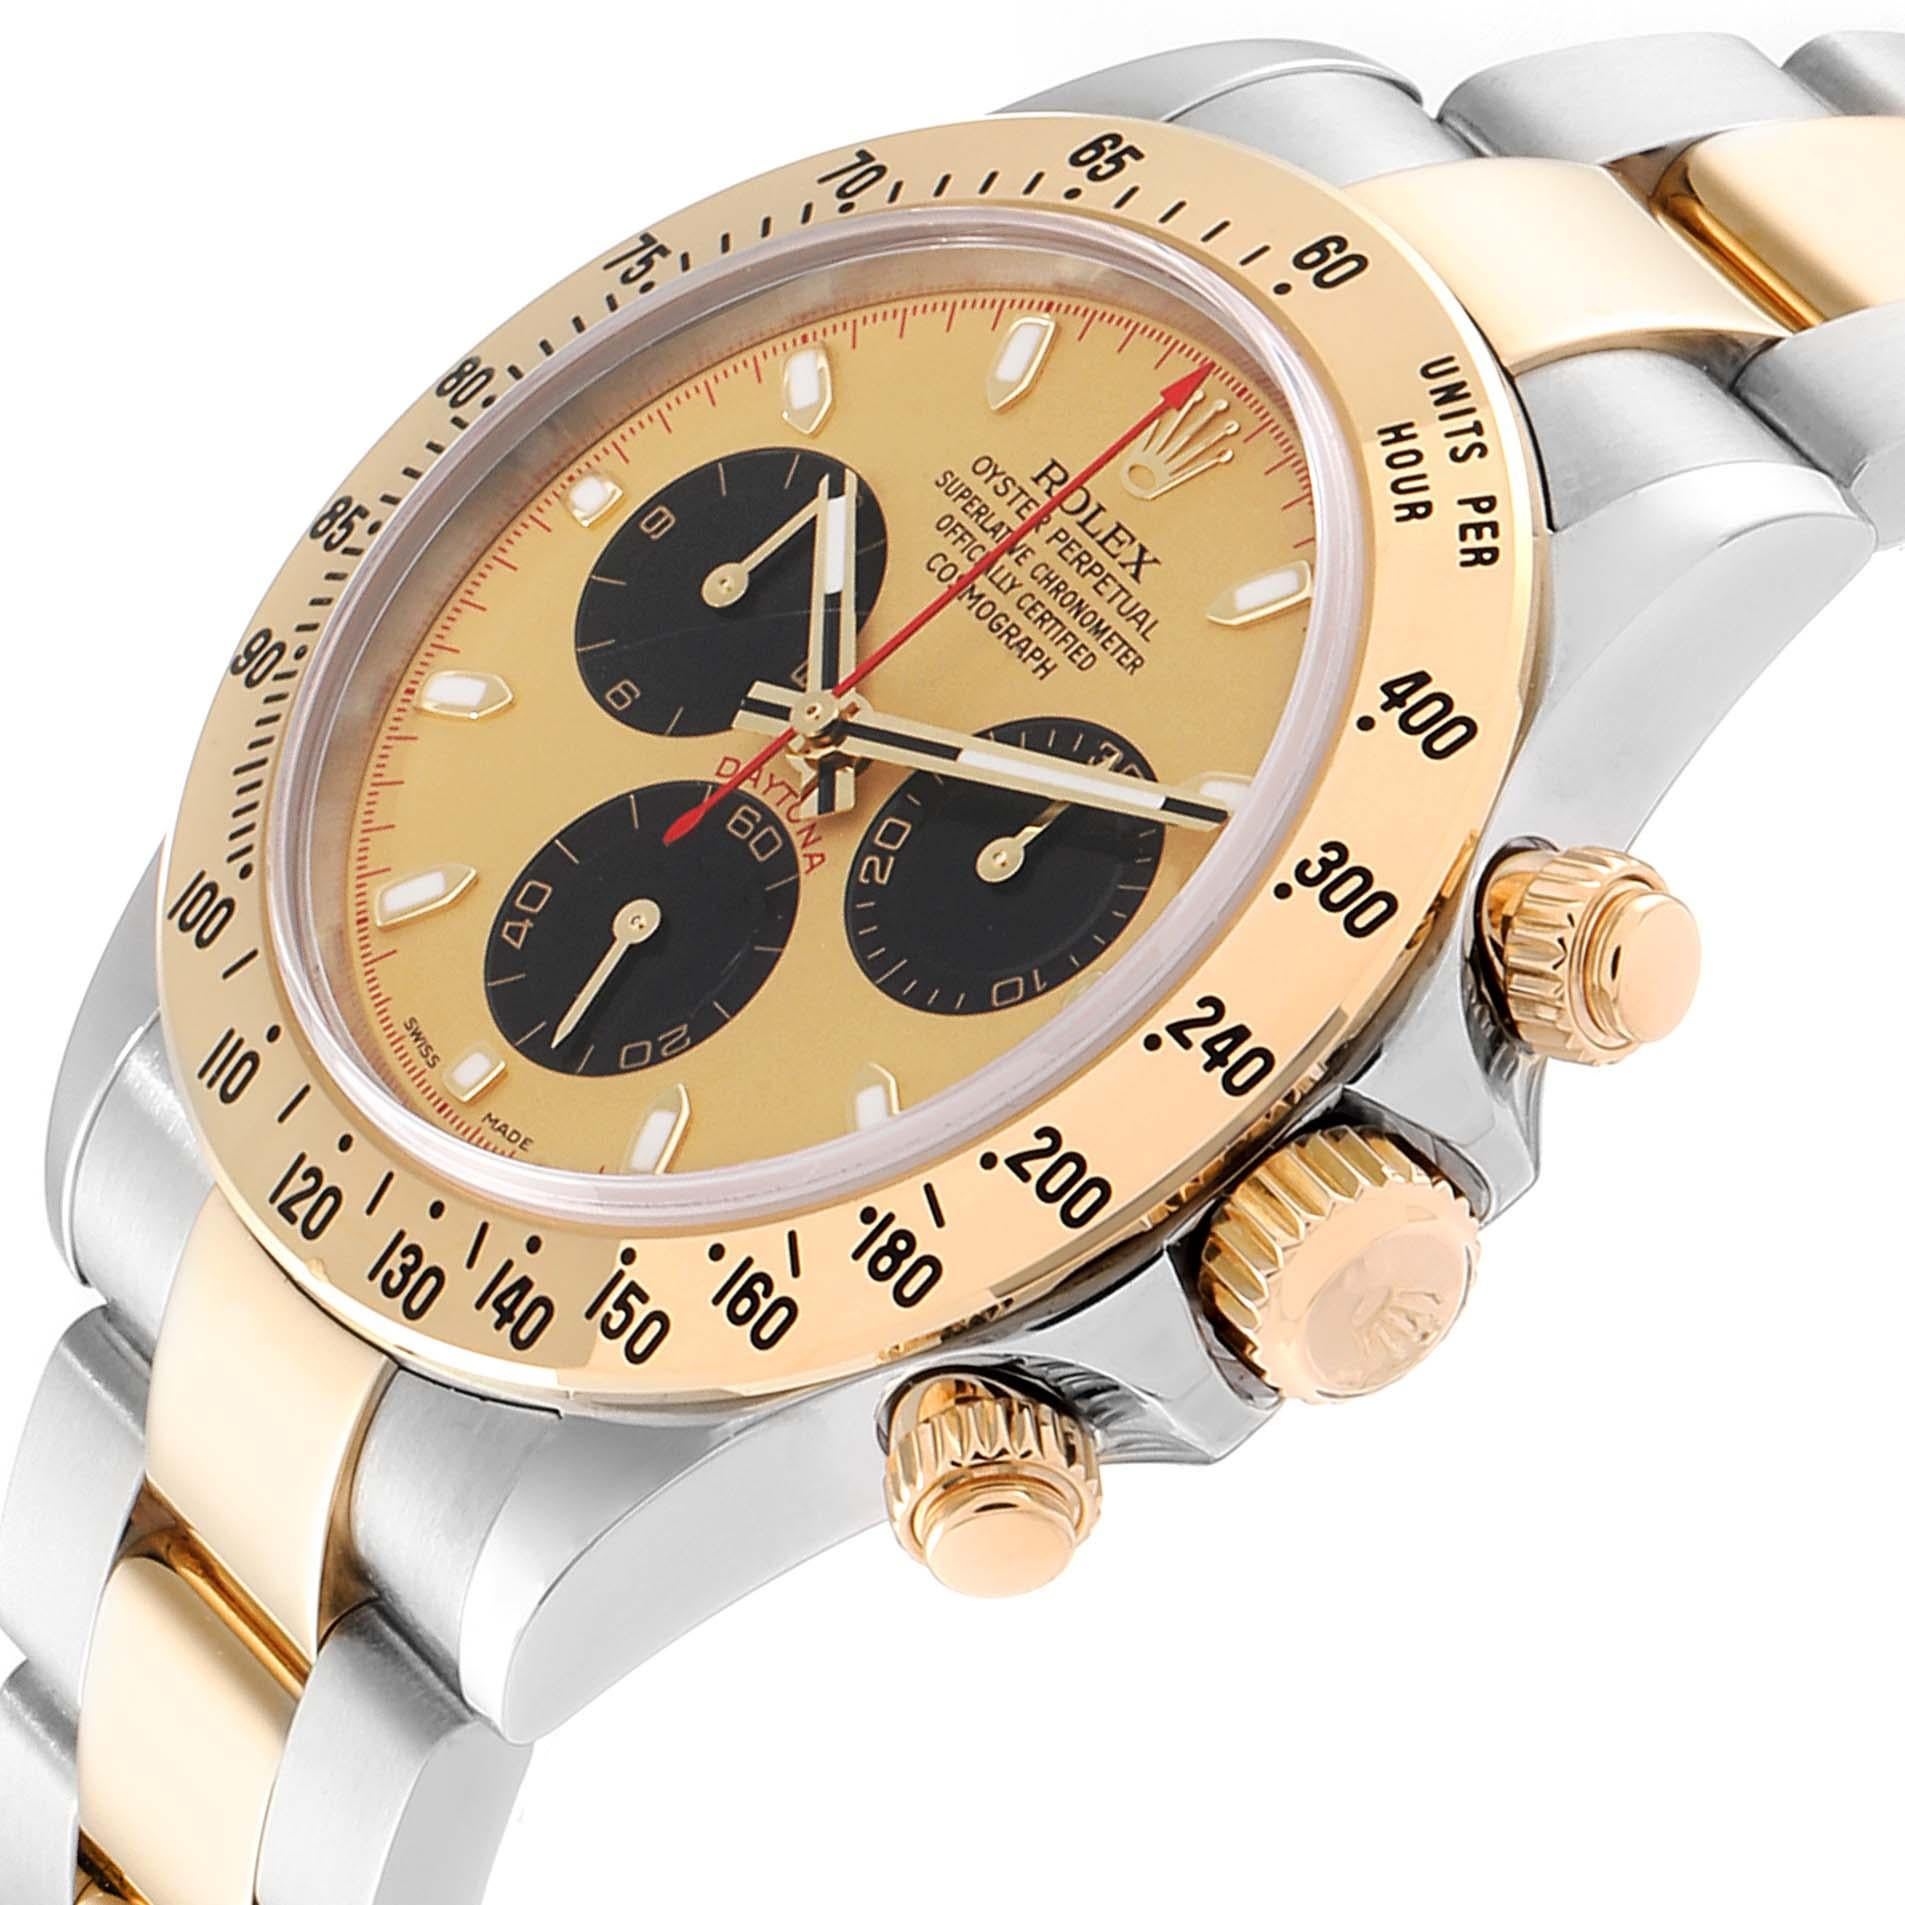 Rolex Daytona Paul Newman Dial Steel Yellow Gold Men's Watch 116523 In Excellent Condition For Sale In Atlanta, GA